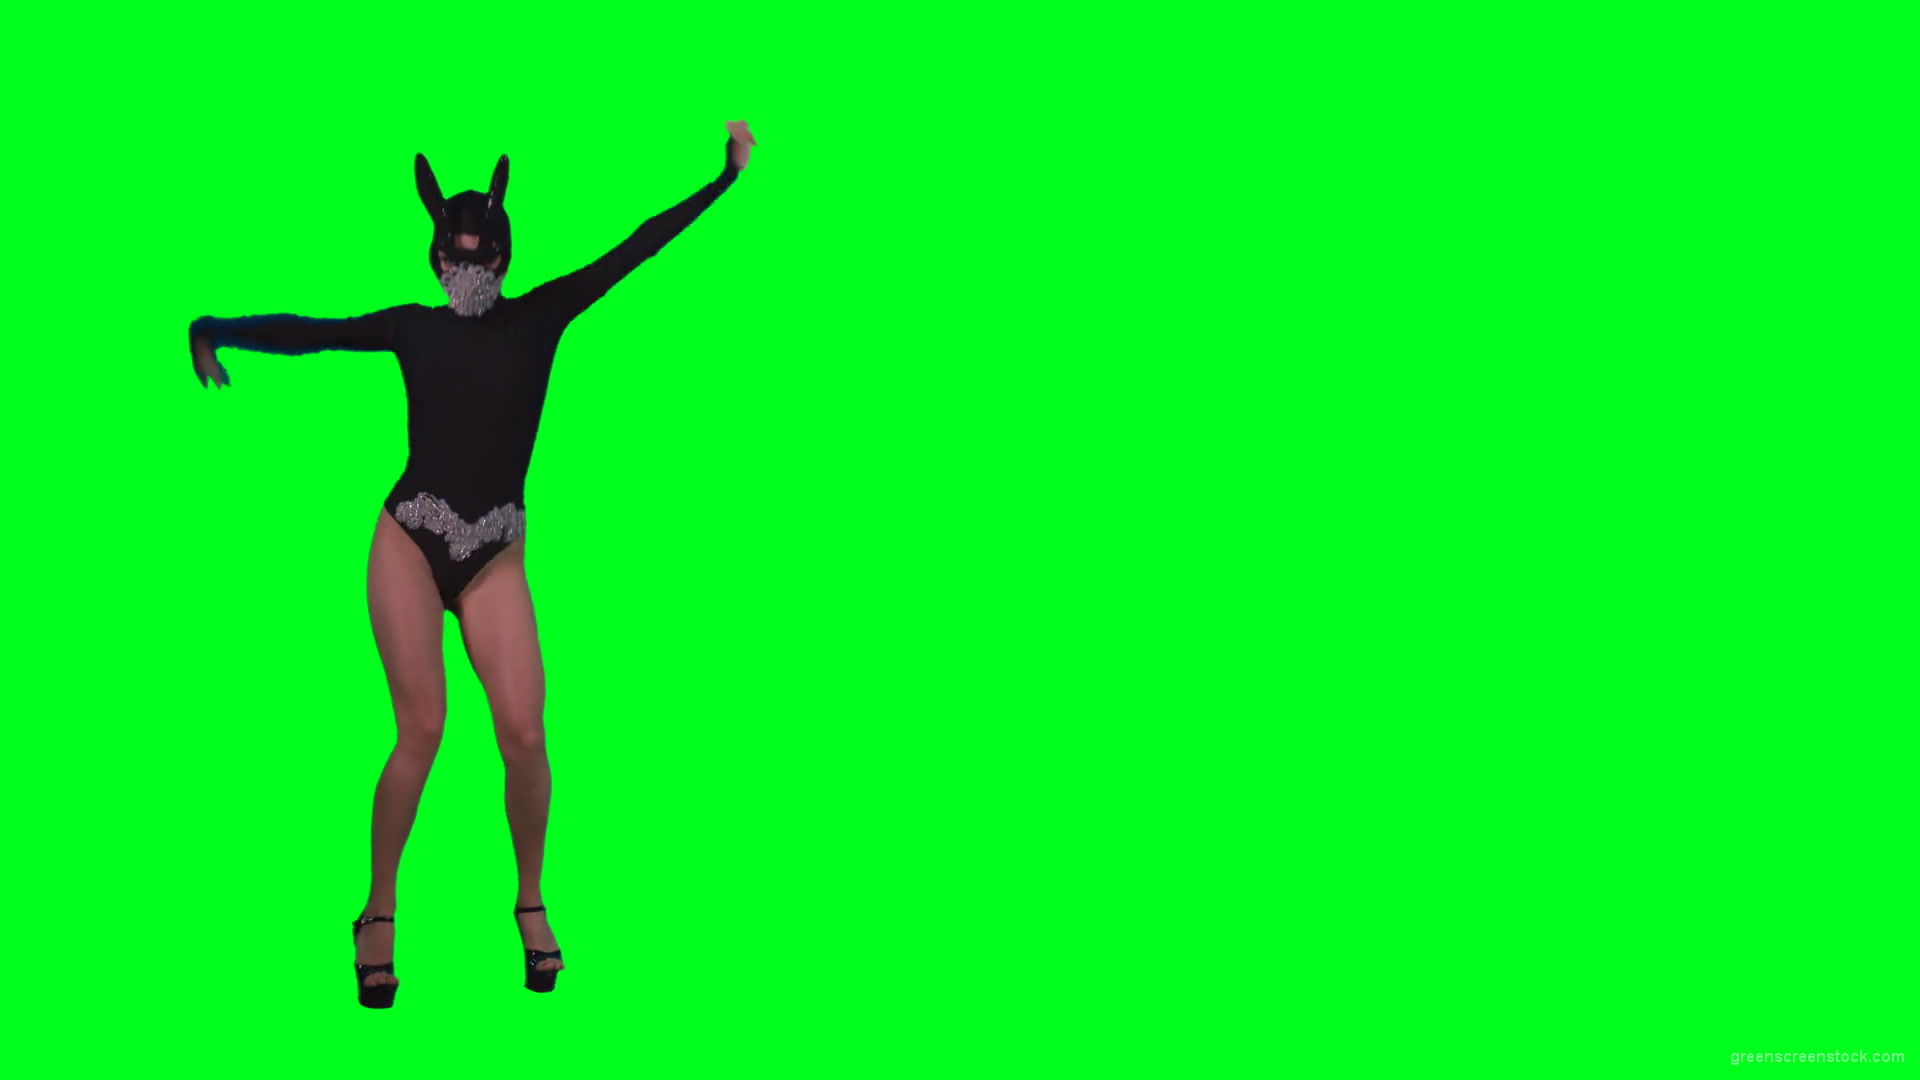 Amazing-black-banny-rabbit-girl-dancing-go-go-isolated-on-green-screen-RAVE-Video-Footage-1920_009 Green Screen Stock